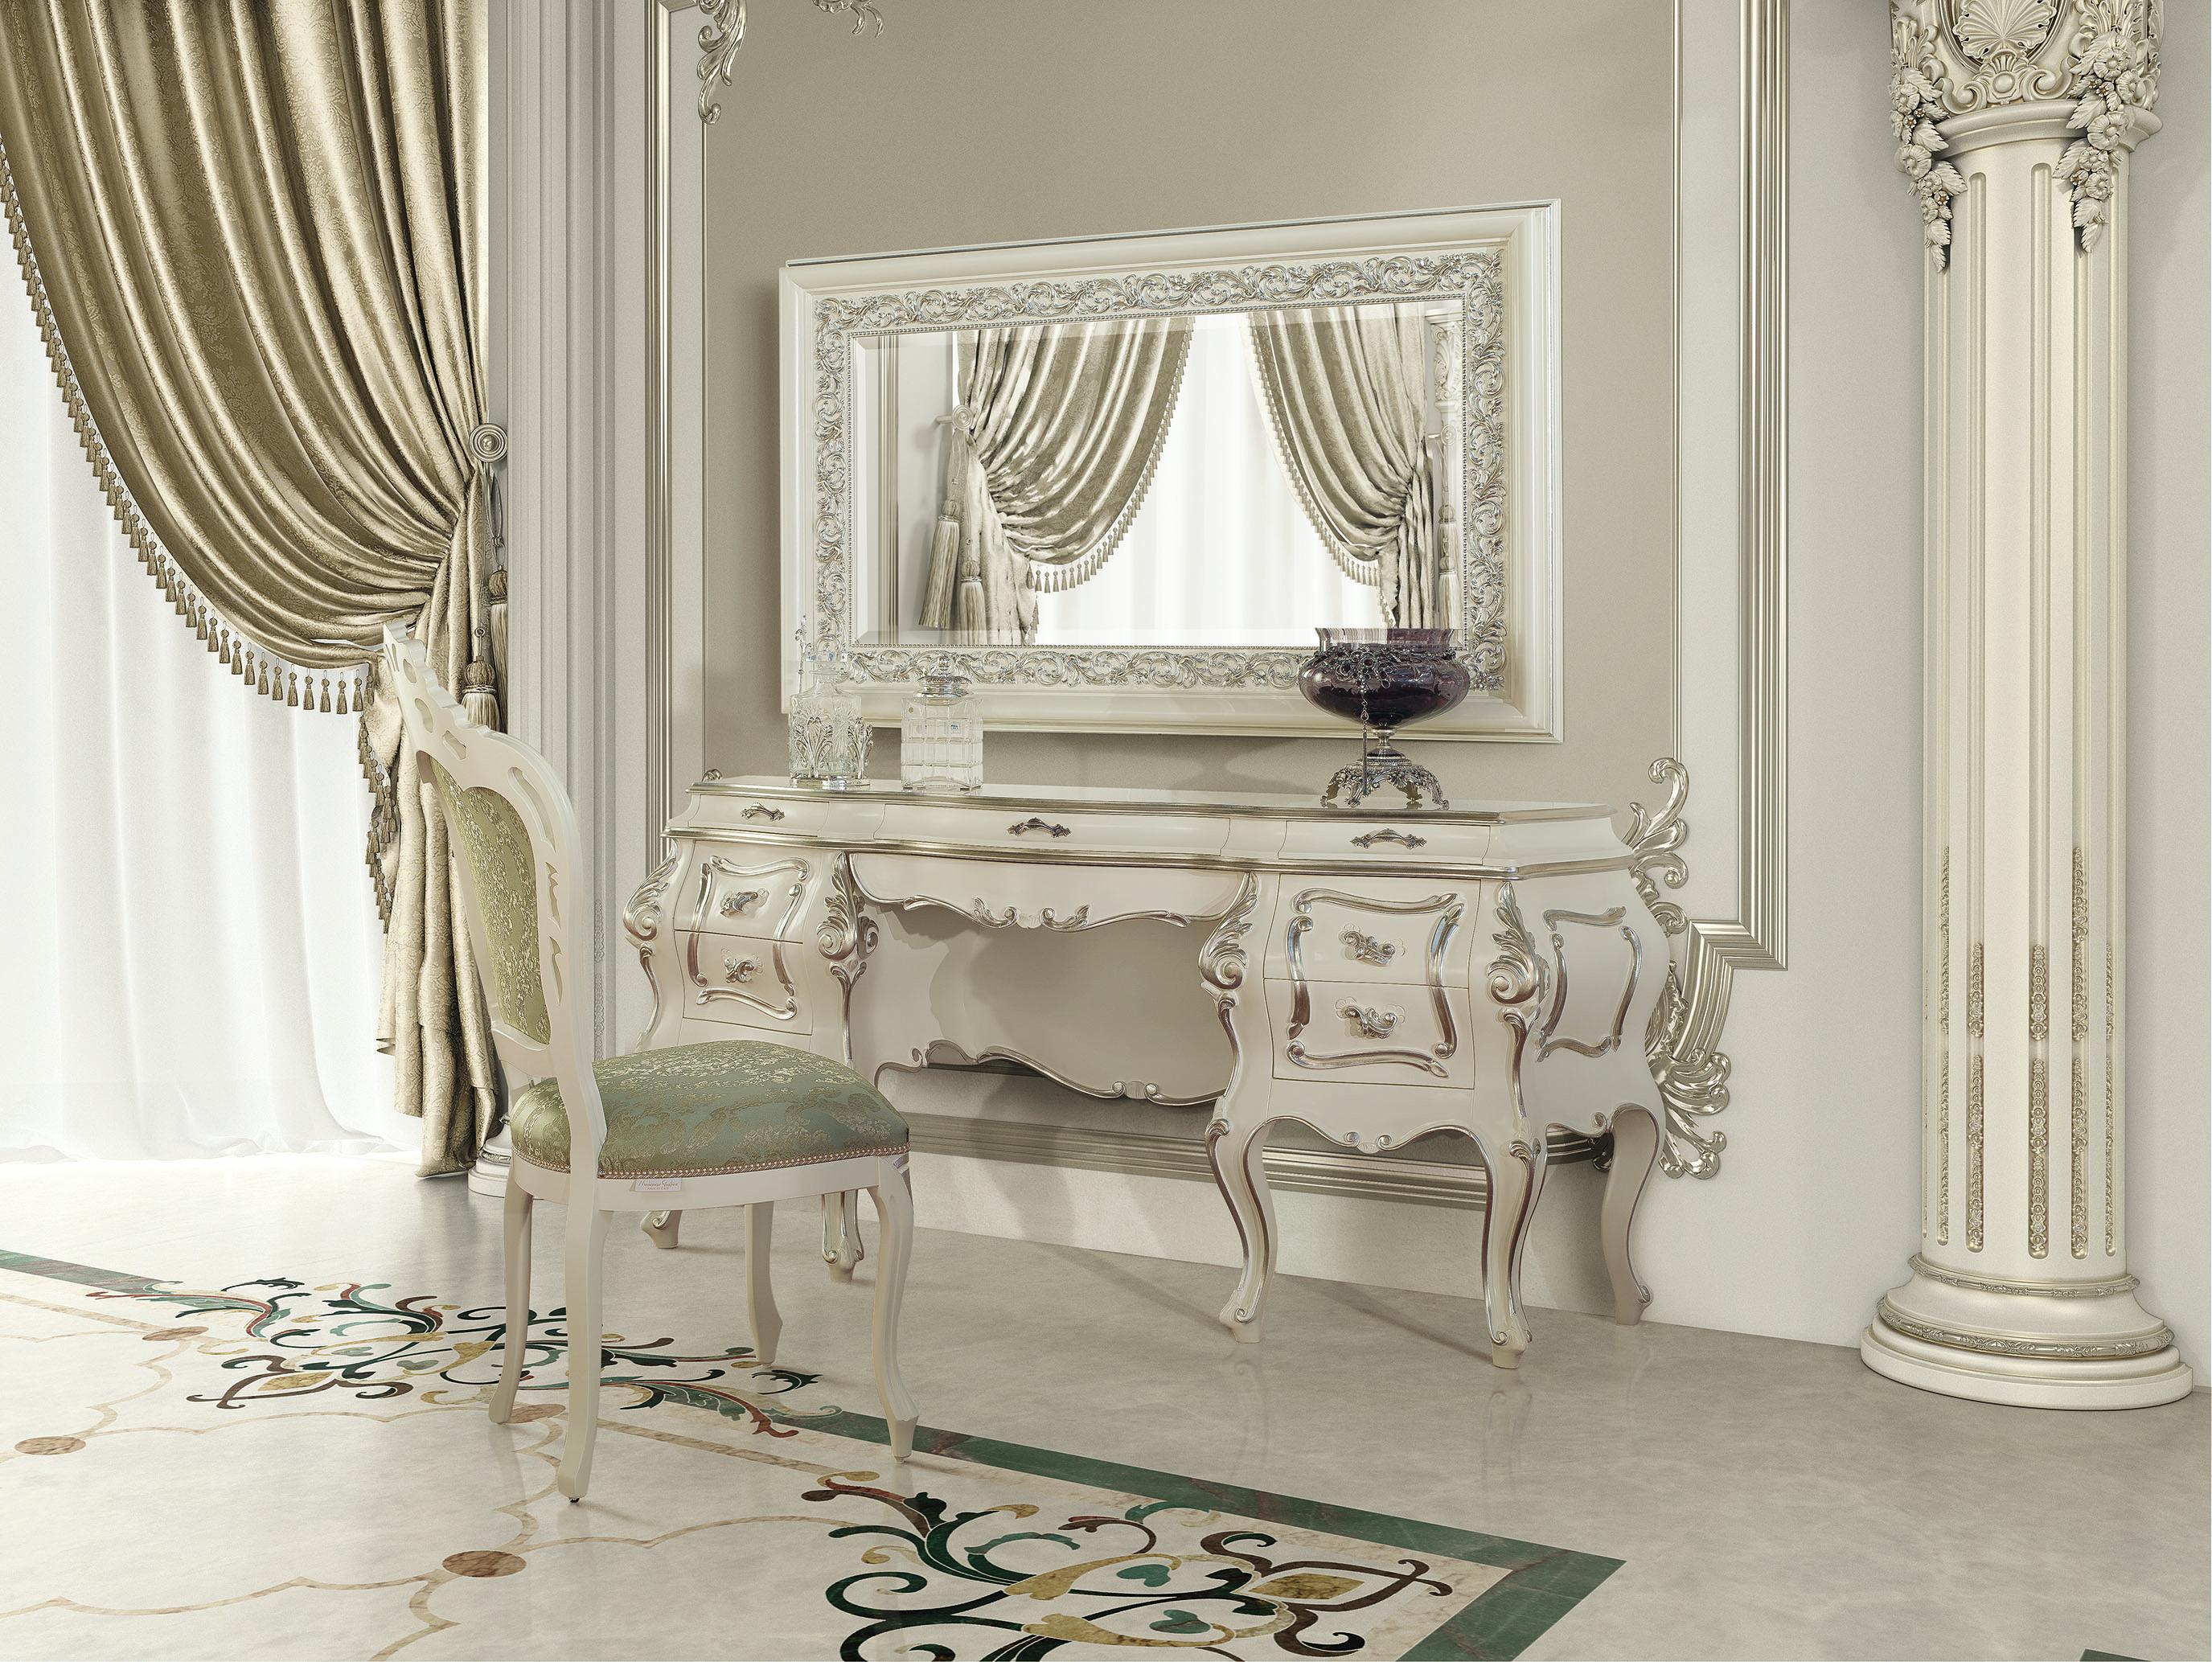 Scrolled baroque legs elegant and majestic vanity unit with silver-leaf detailed carvings on edges (with friezes) and panels. Wonderfully designed knobs and shape. Modenese Gastone Luxury, Italian brand, can also act as a partner for your interior